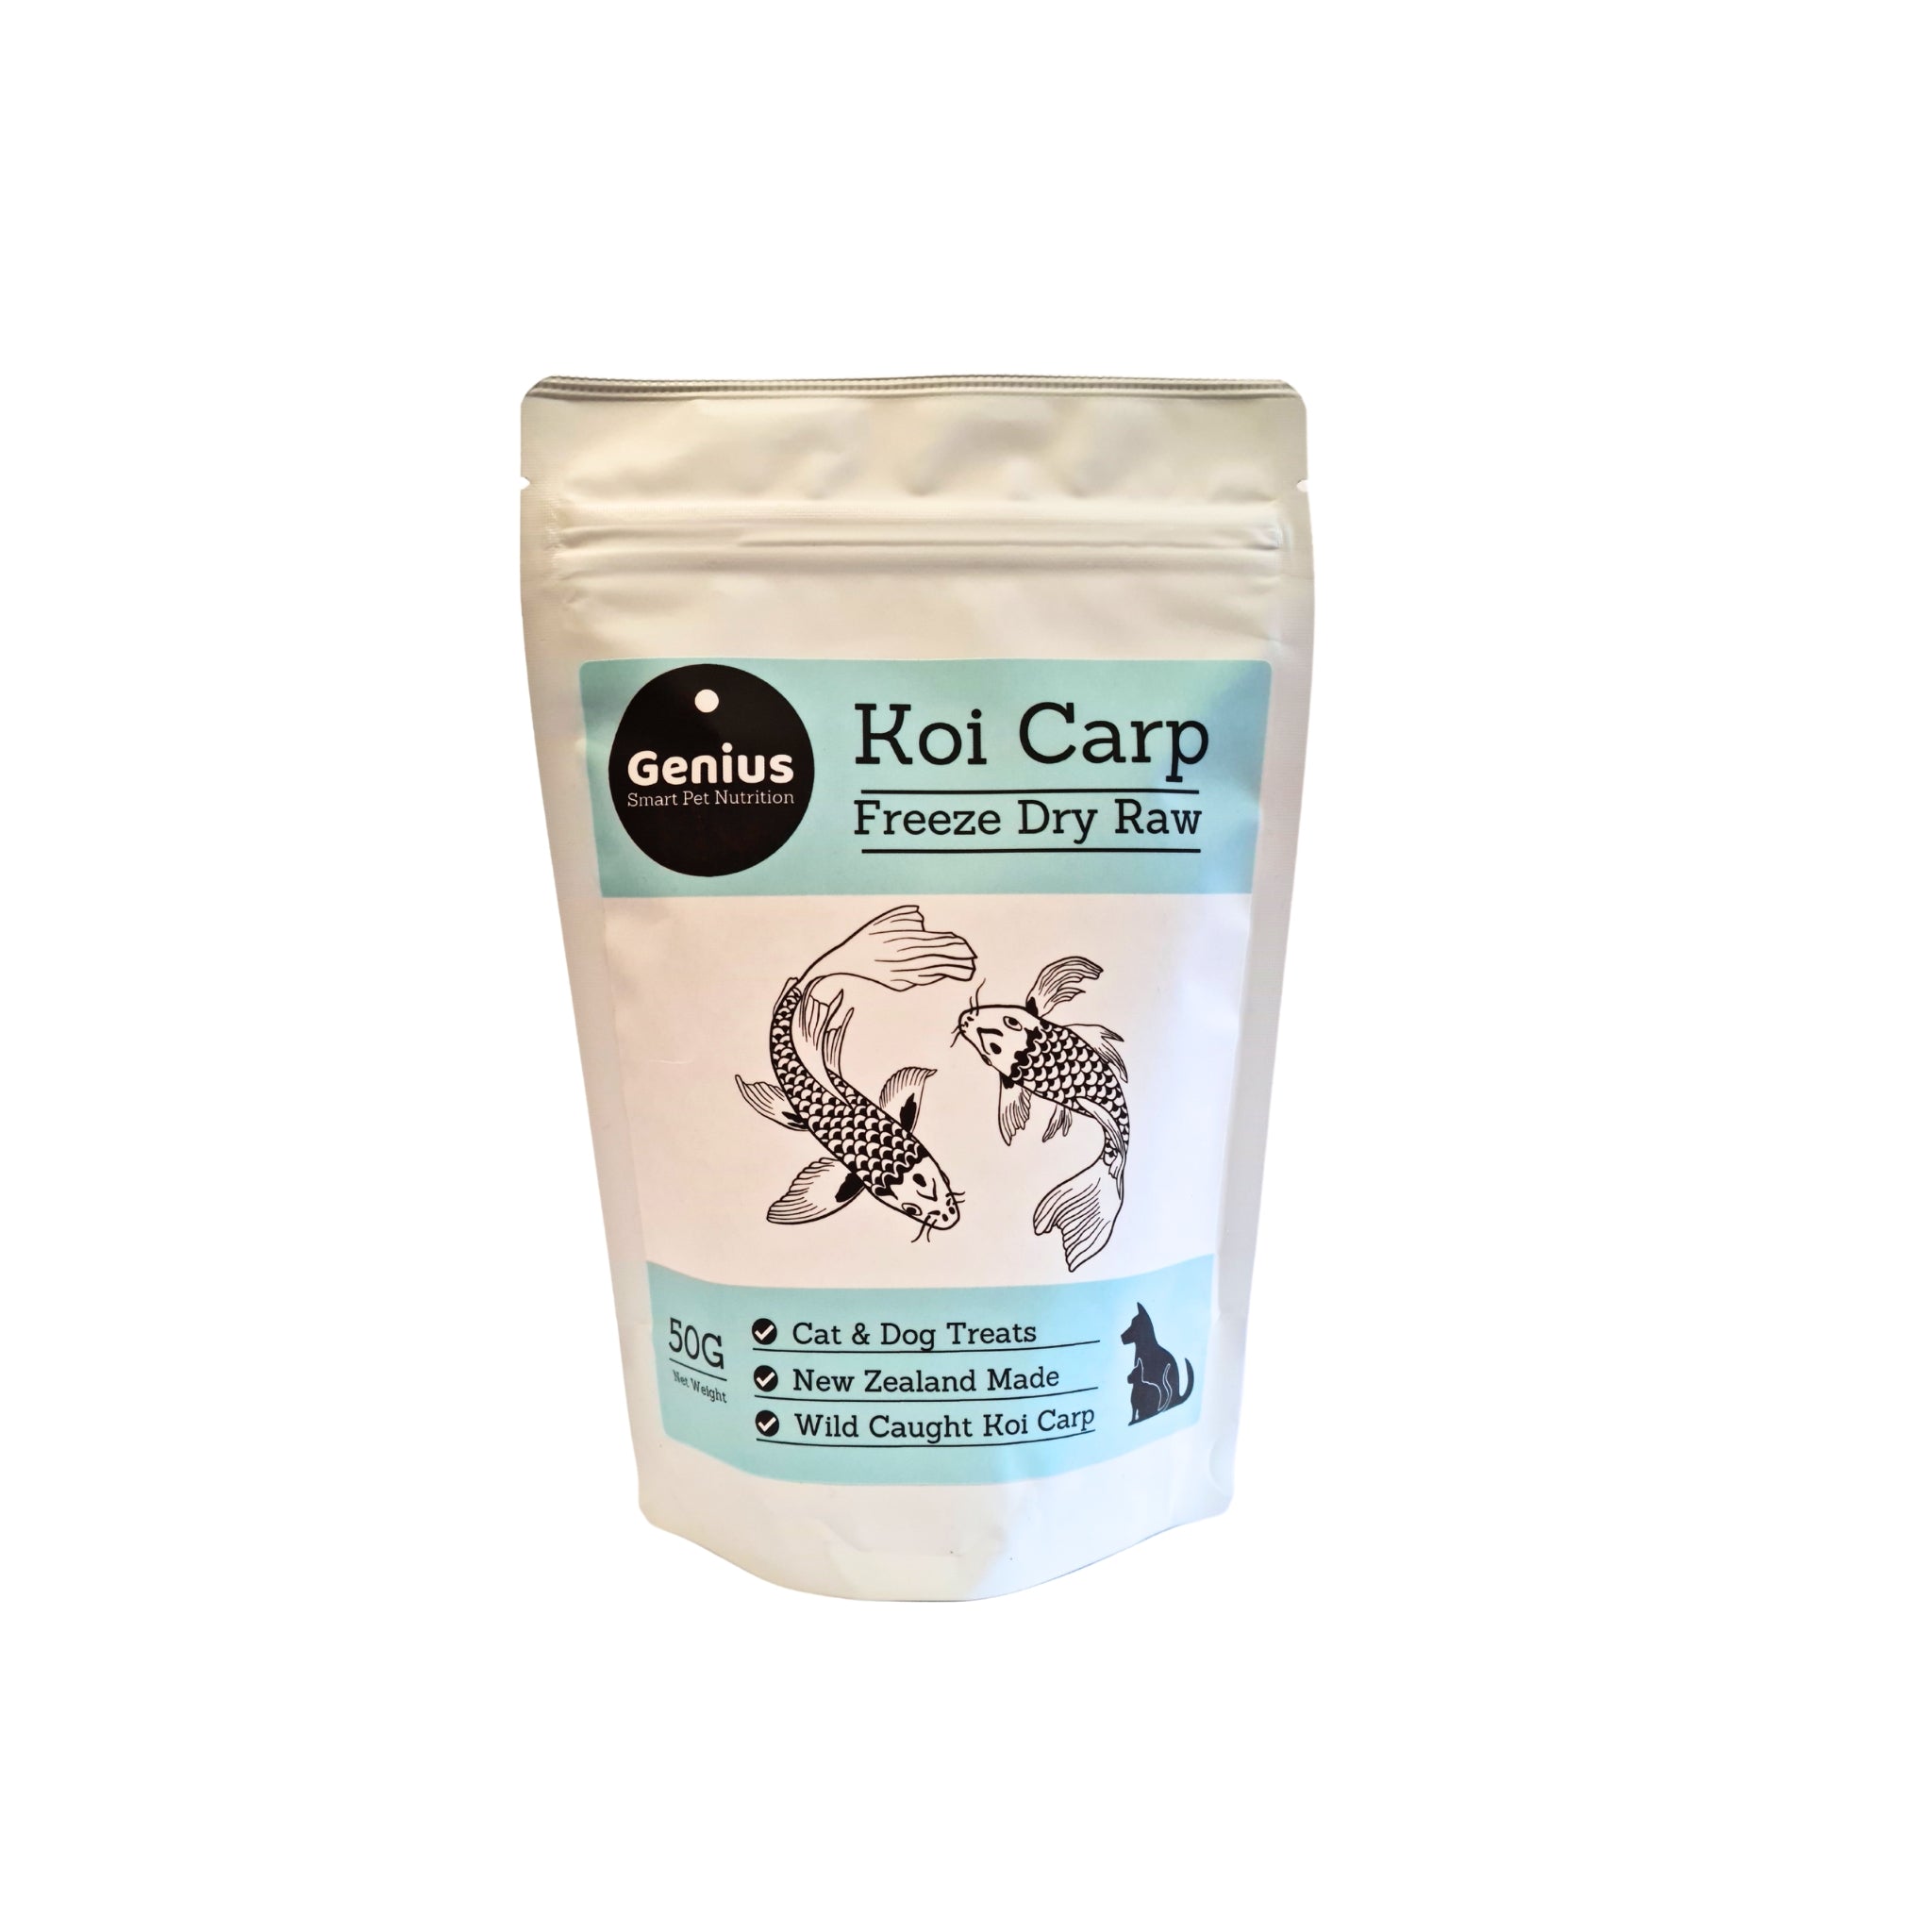 Koi Carp freeze dried dog and cat treats front of packet